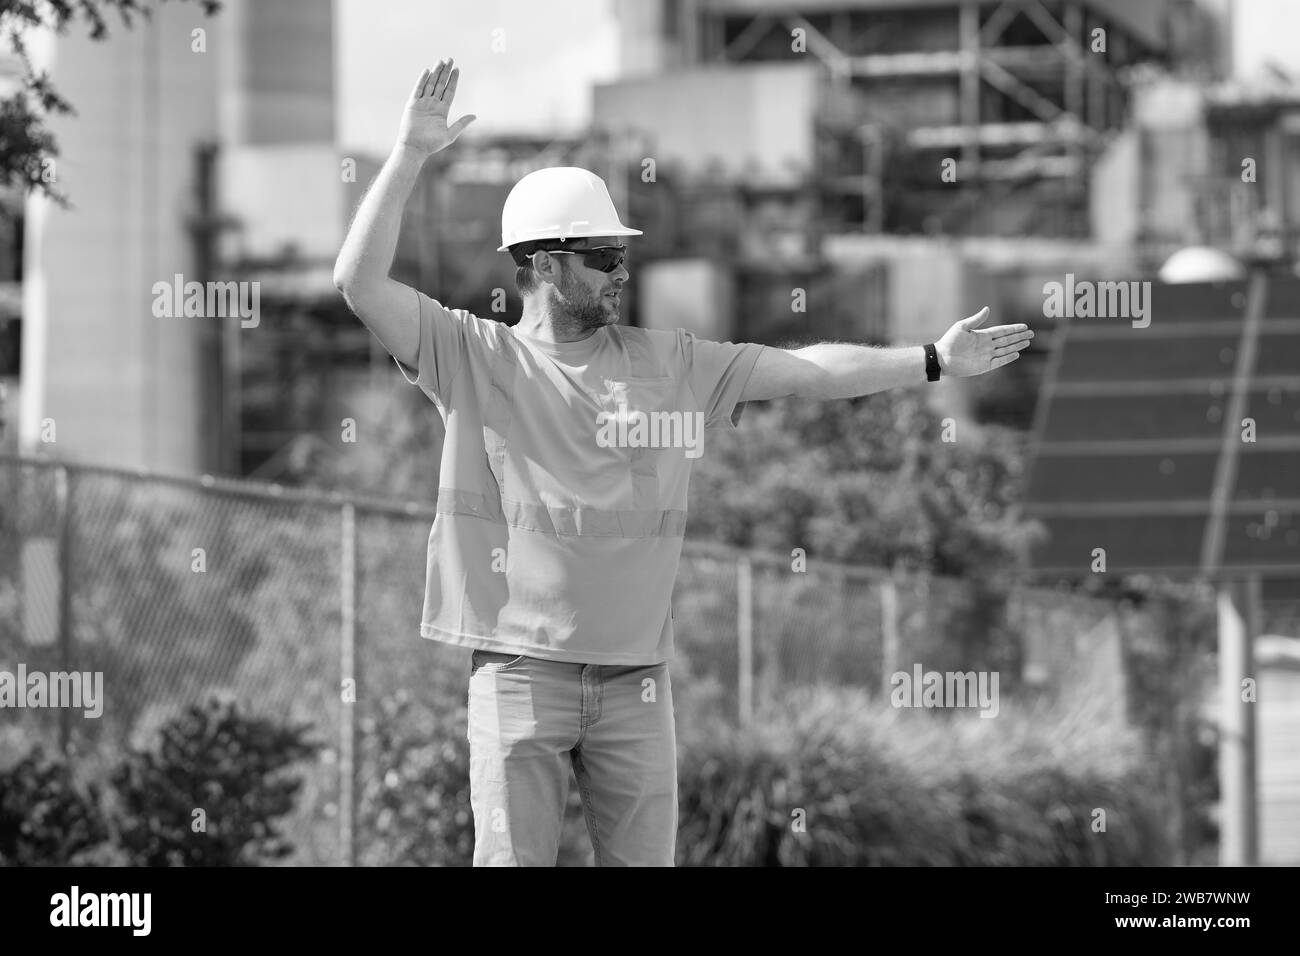 Construction worker at work. Man wearing hardhat and safety vest at construction site Stock Photo